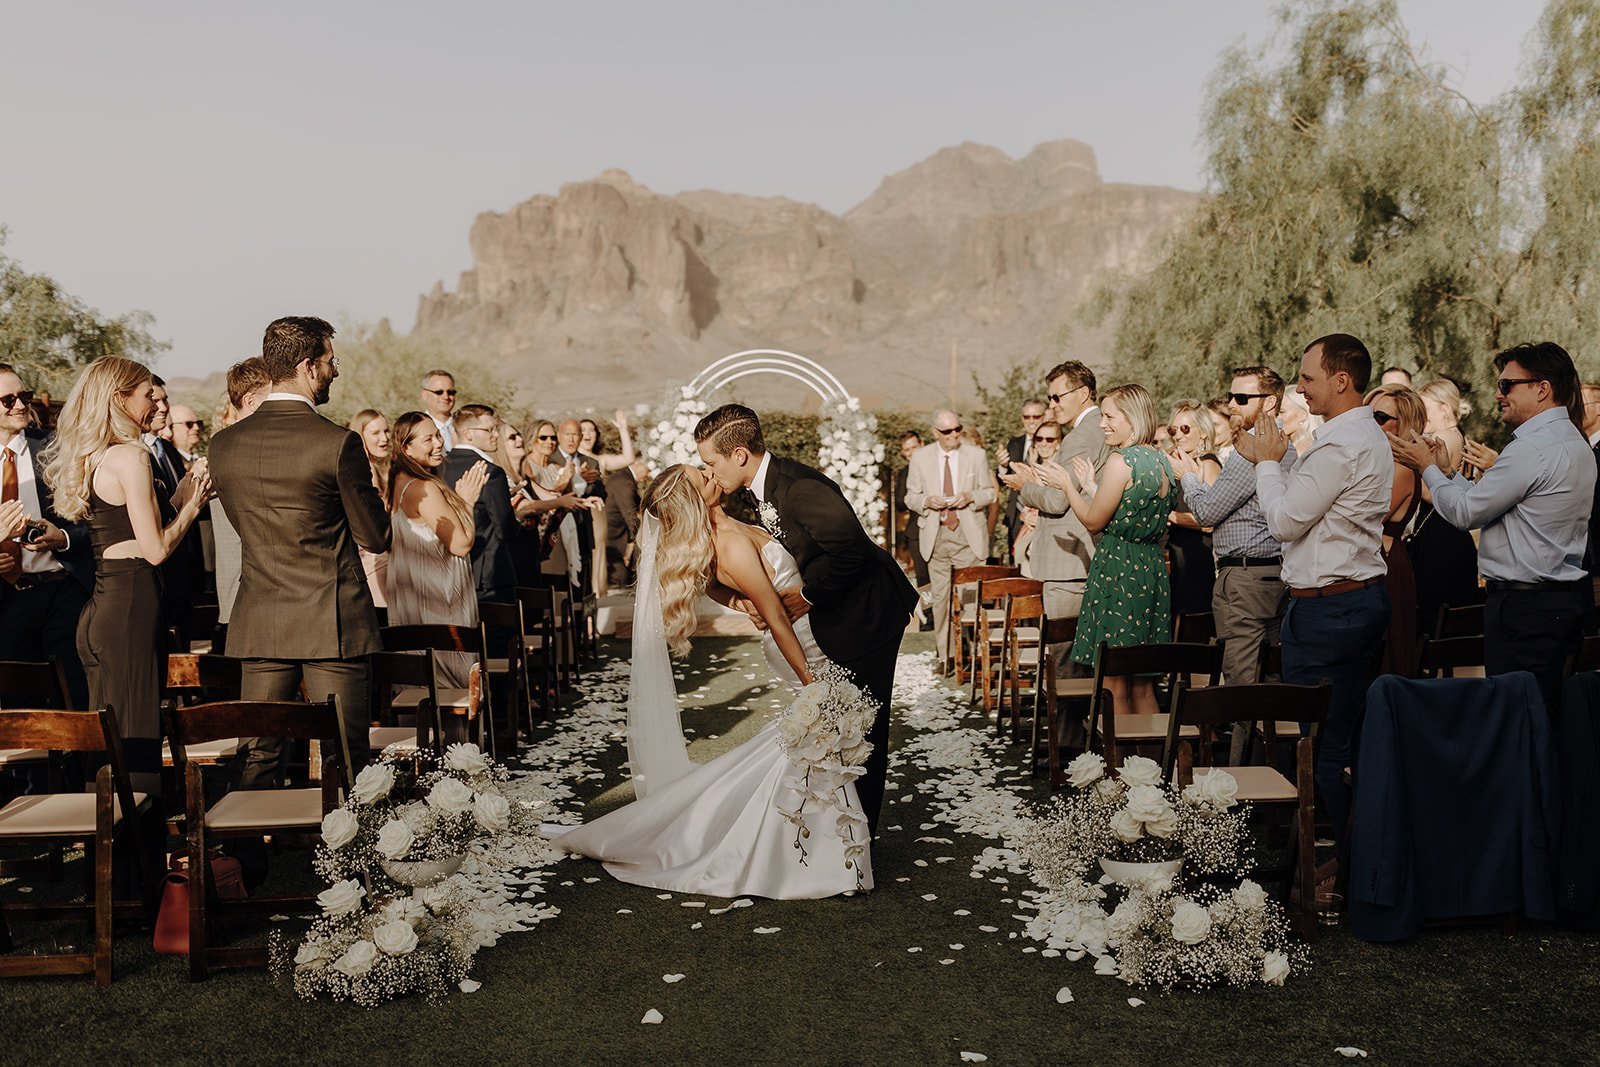 Bride and groom kissing at the end of the wedding aisle for their desert wedding in Arizona